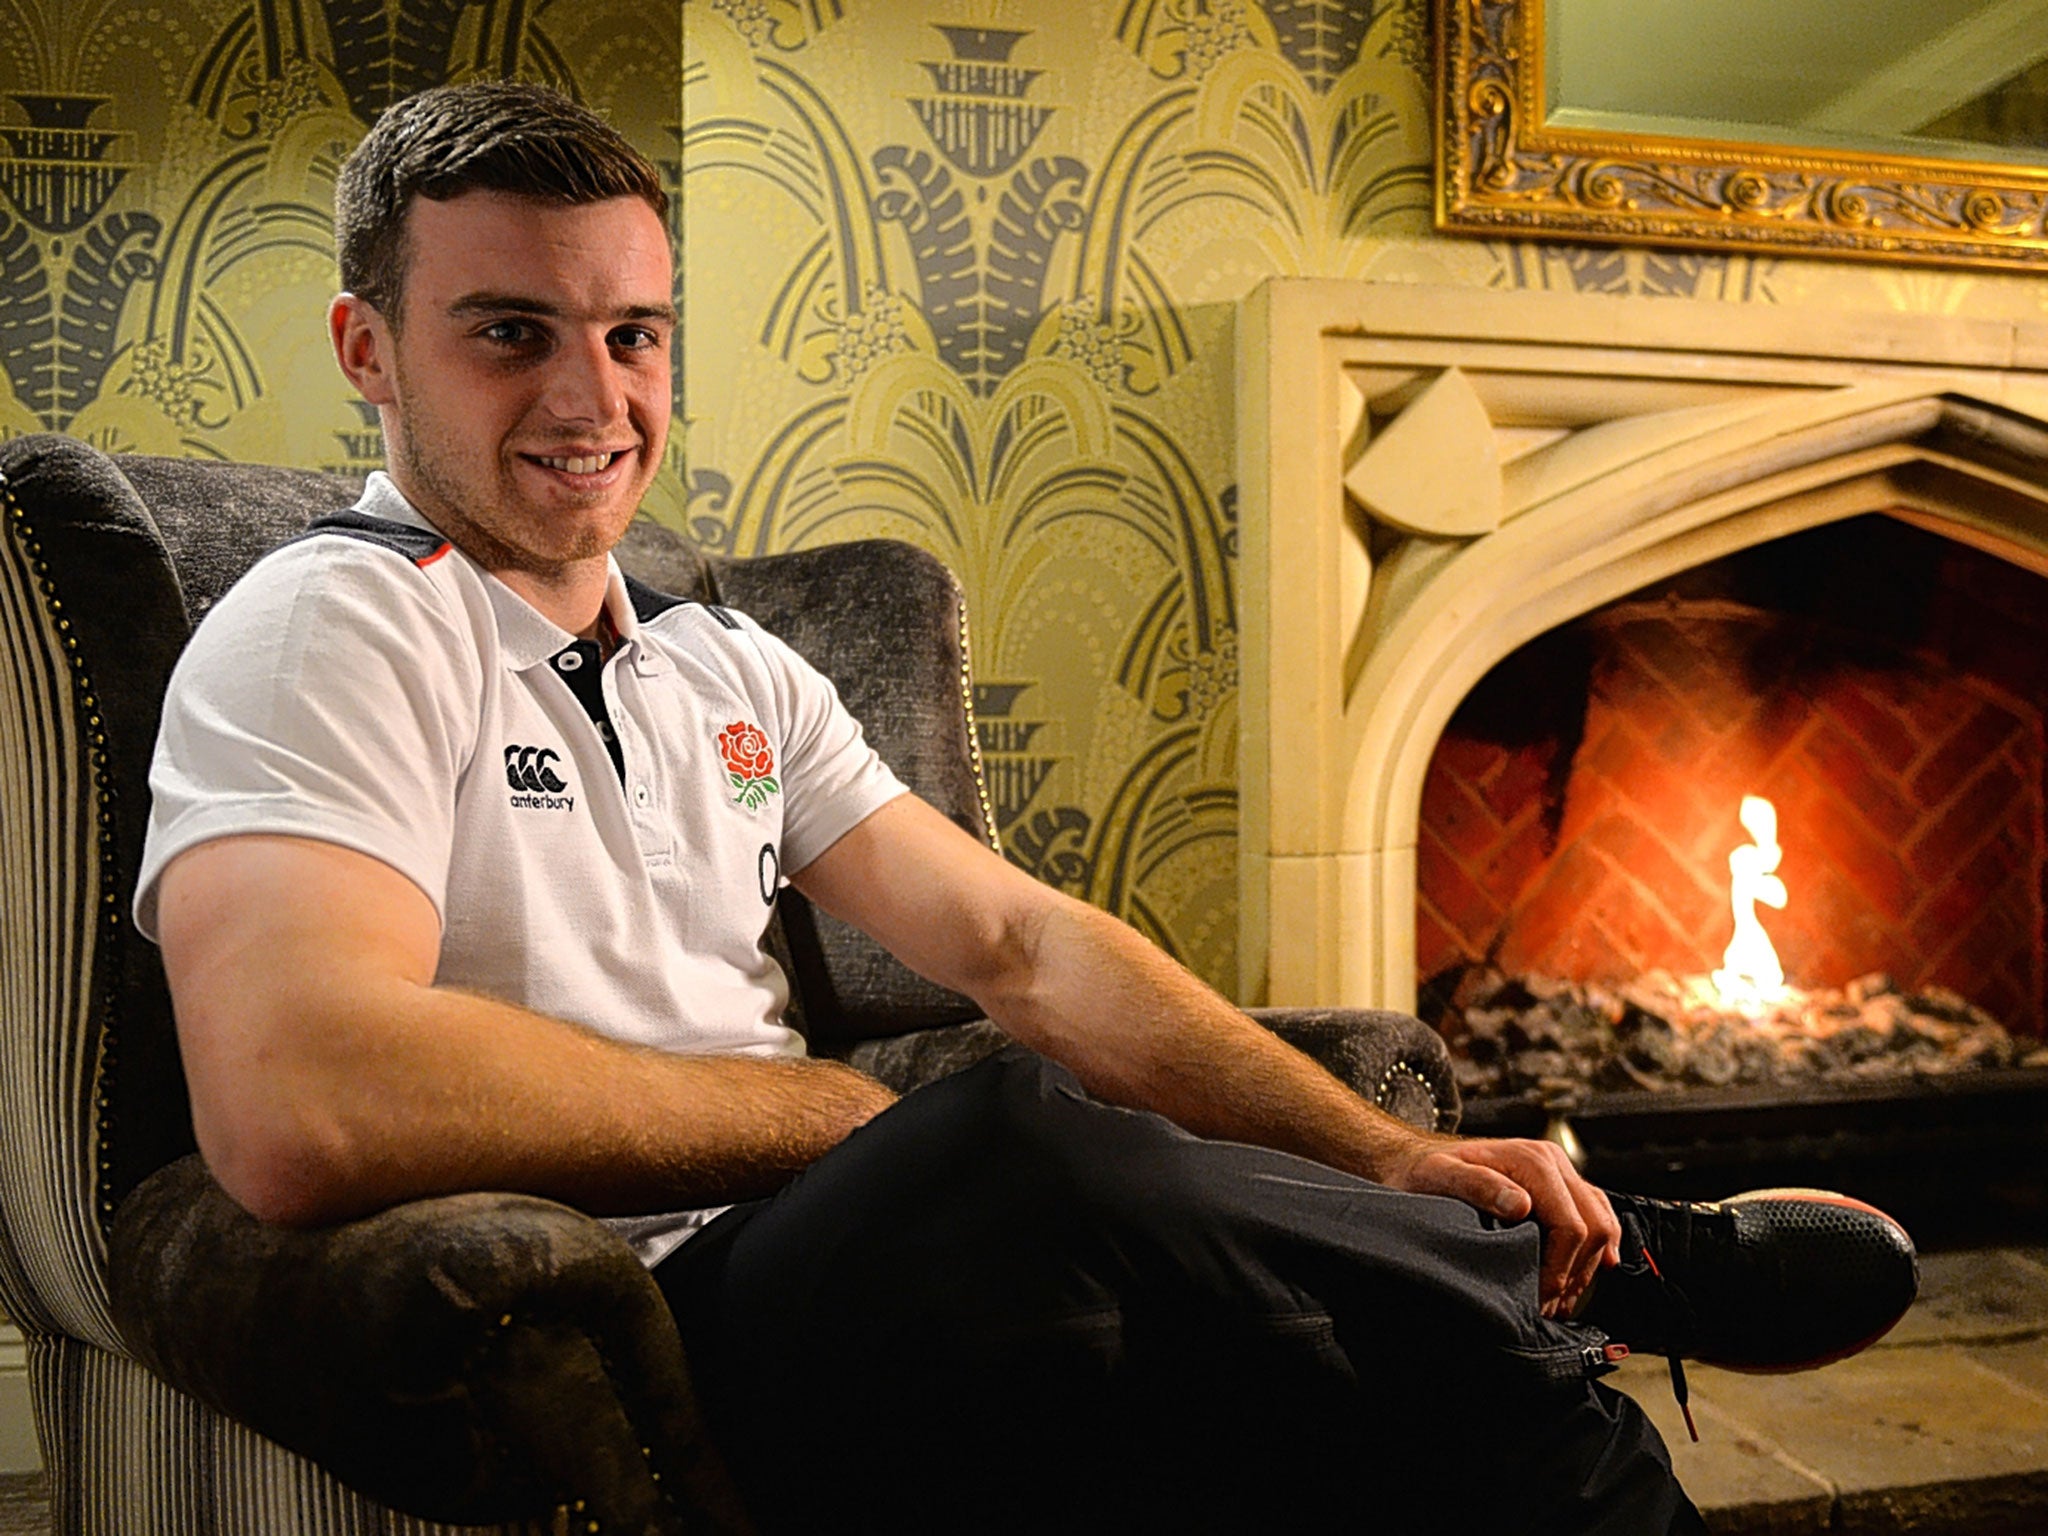 George Ford has won only six caps yet already looks a natural on the international stage